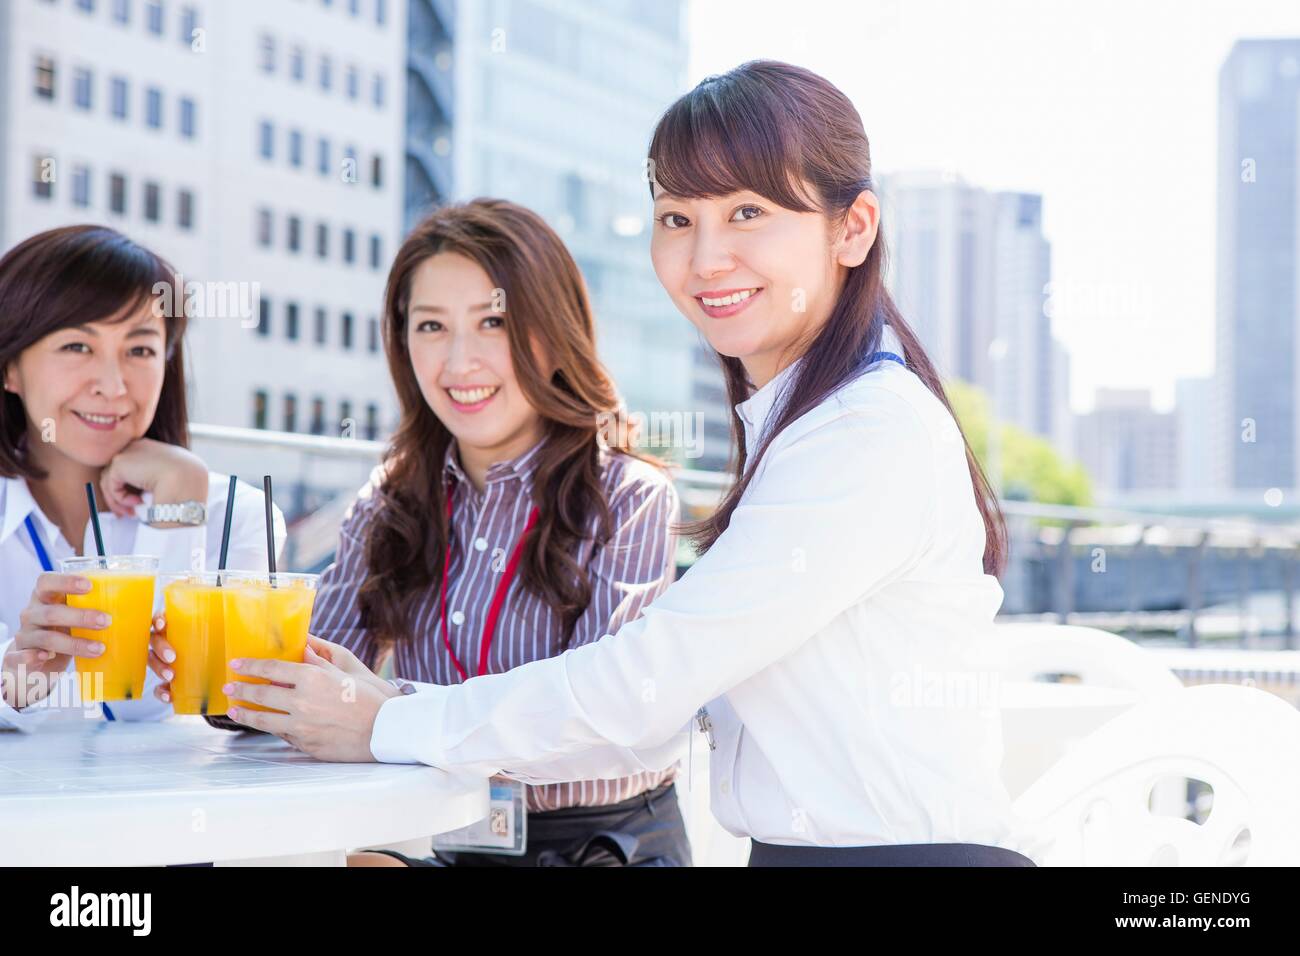 Women making a toast with juice Stock Photo